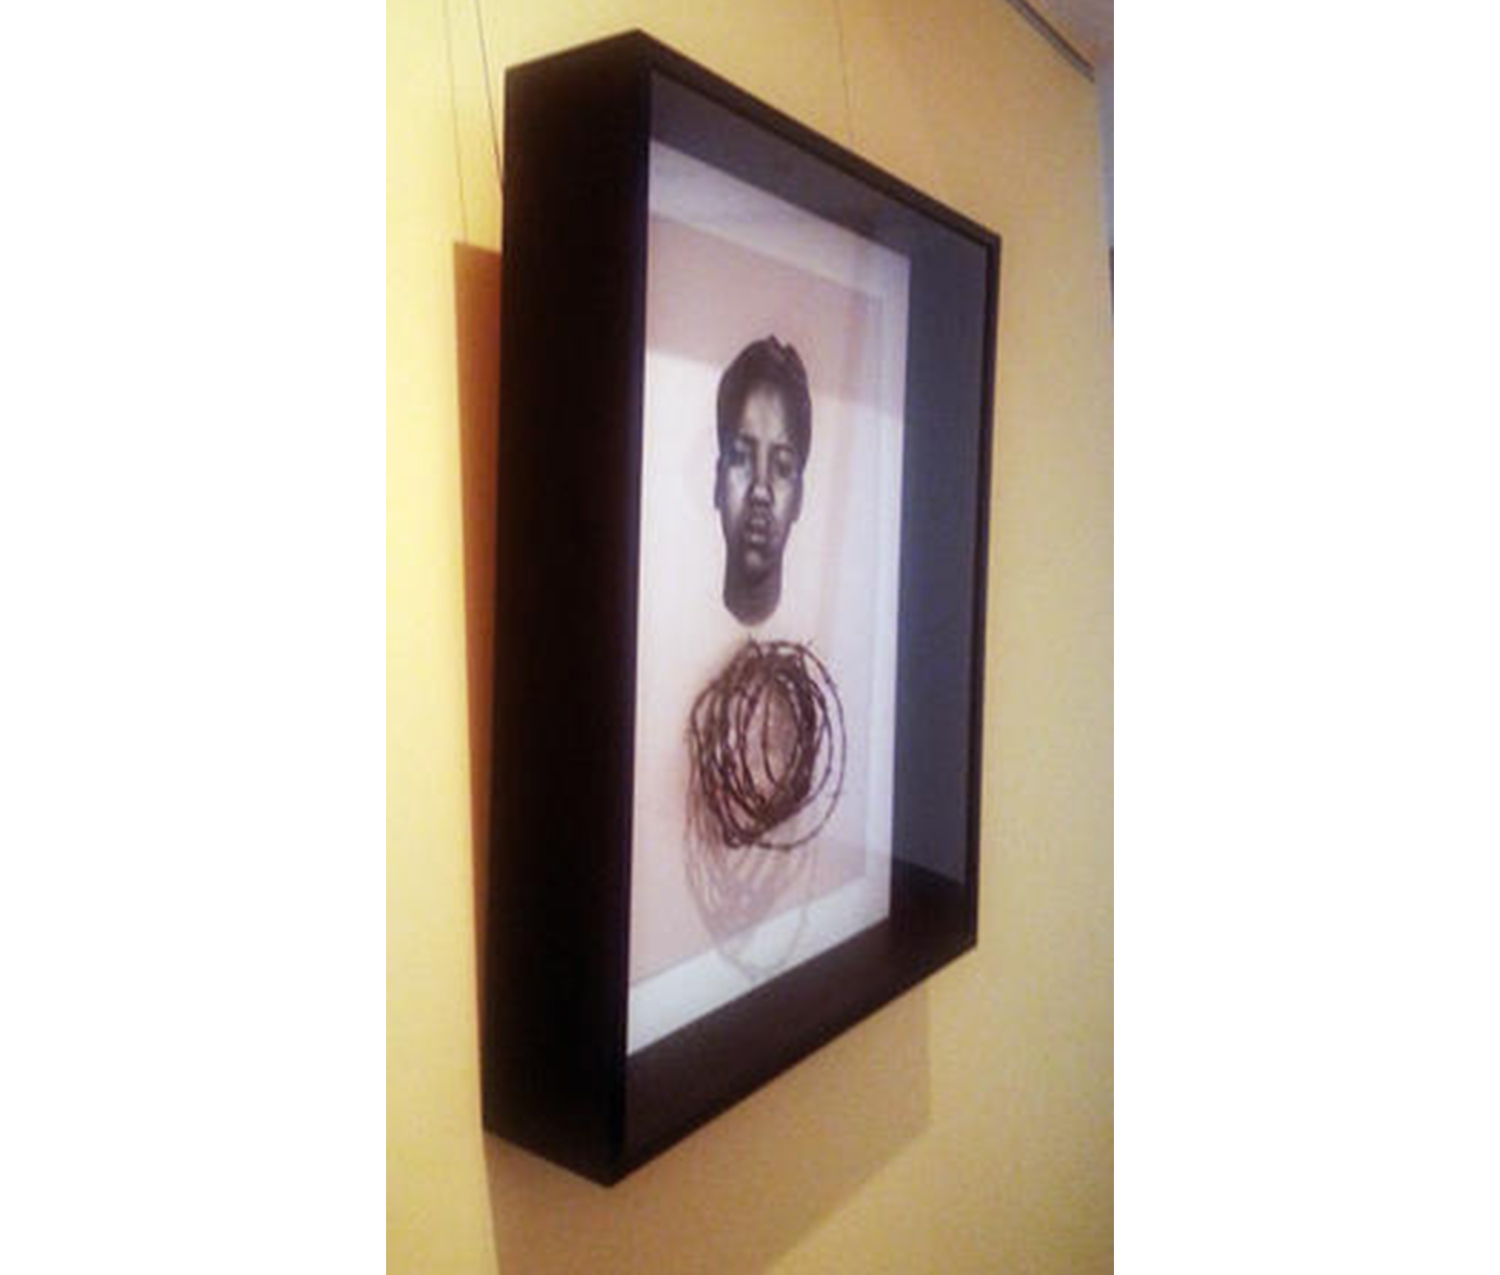 yellow wall with framed print hanging on it. the print shows the frontal head of a frowning African American woman with her hair in an up do over a circlet of real barbed wire encased in a black box